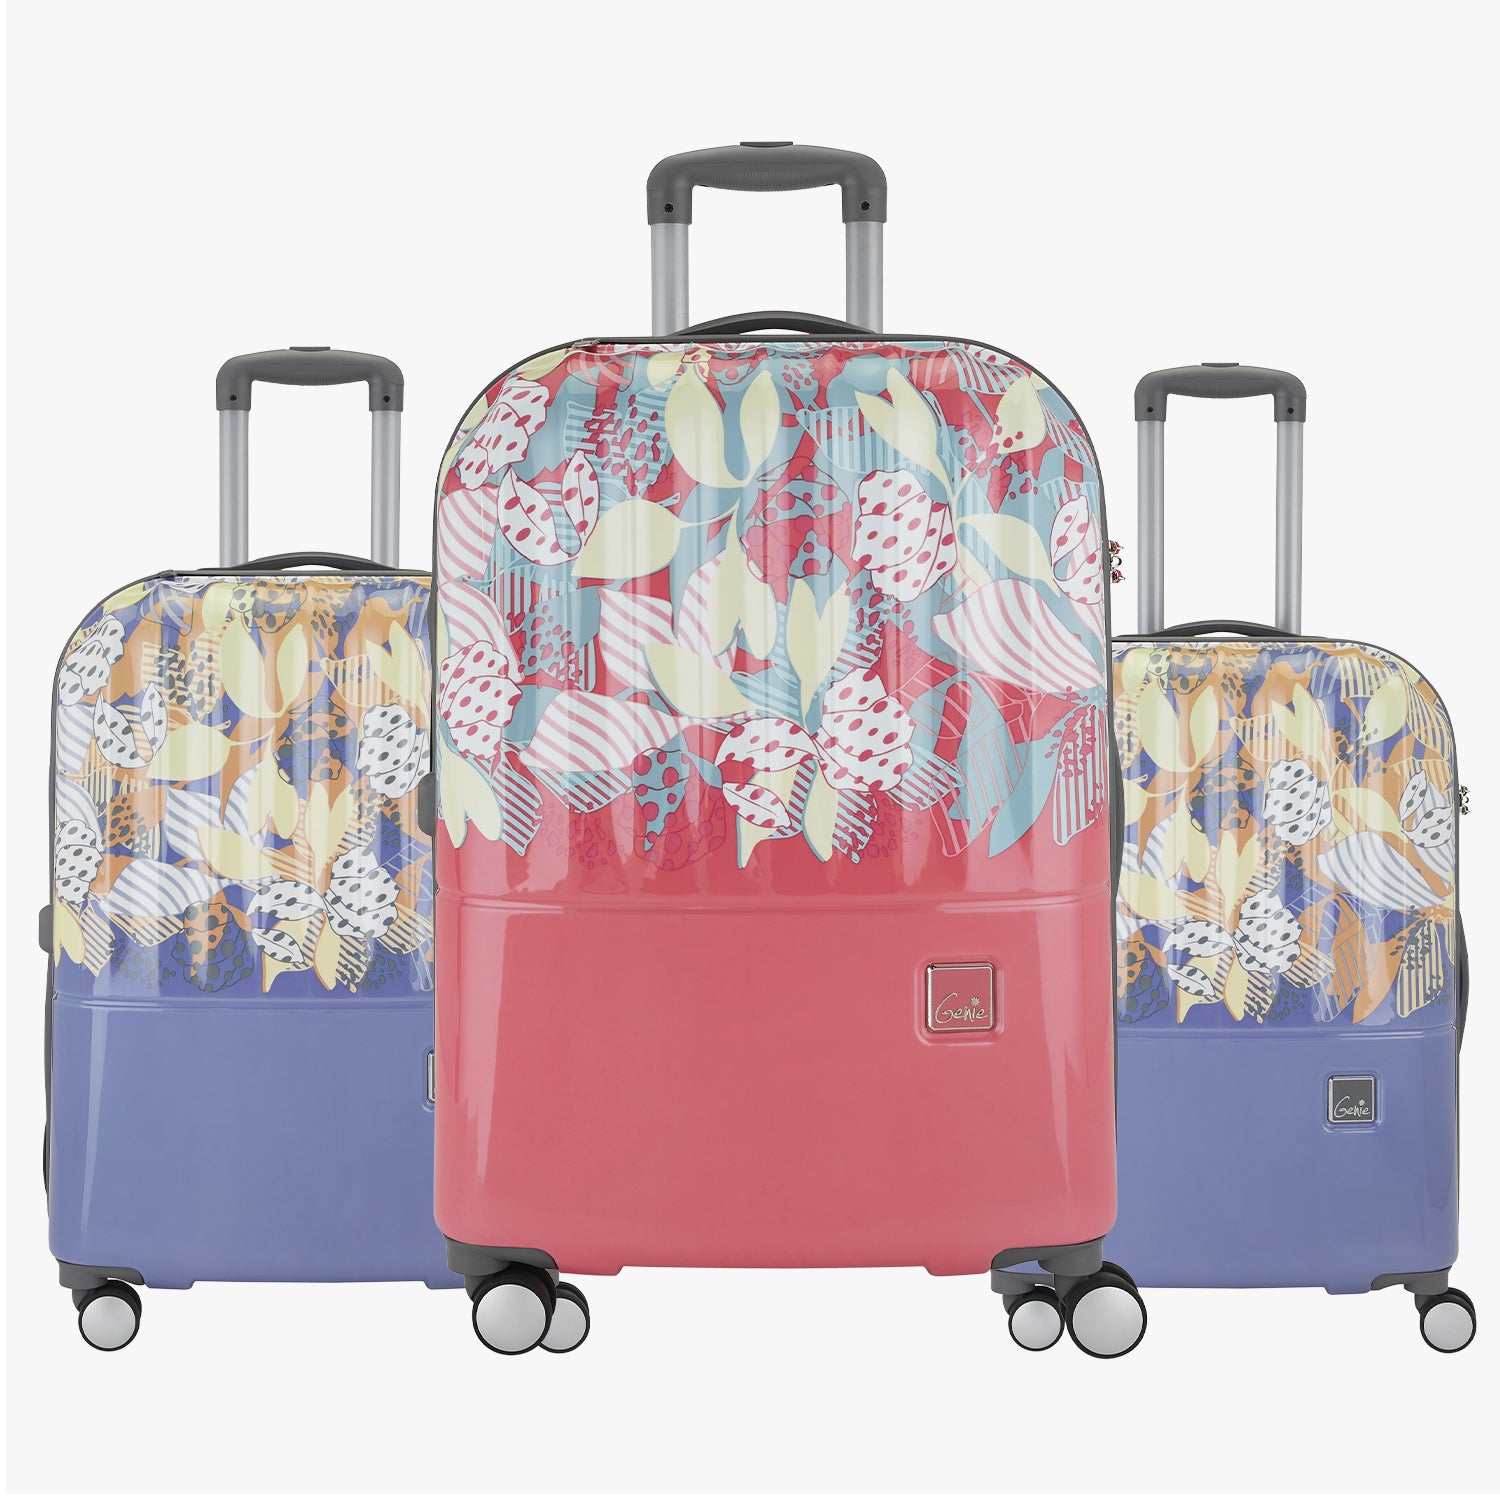 Sprout Small, Medium and Large Hard Luggage Combo Set